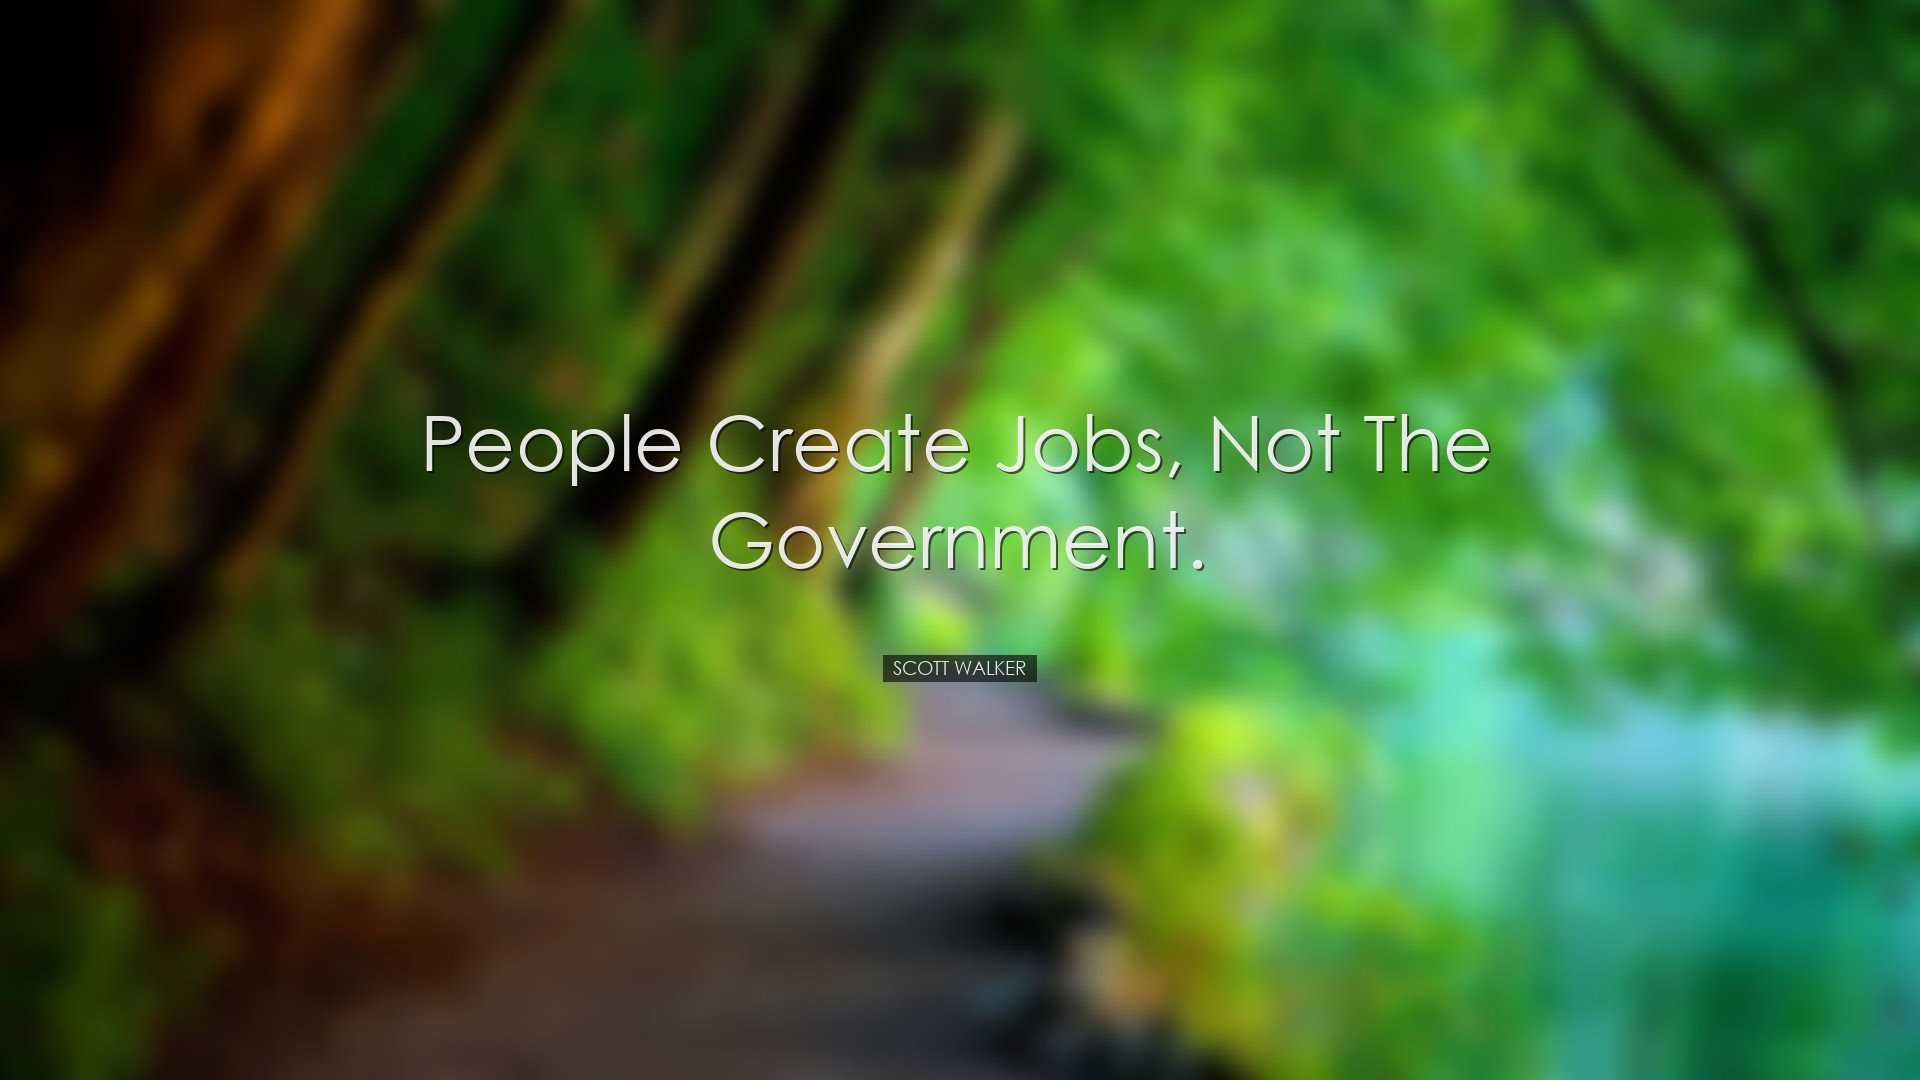 People create jobs, not the government. - Scott Walker